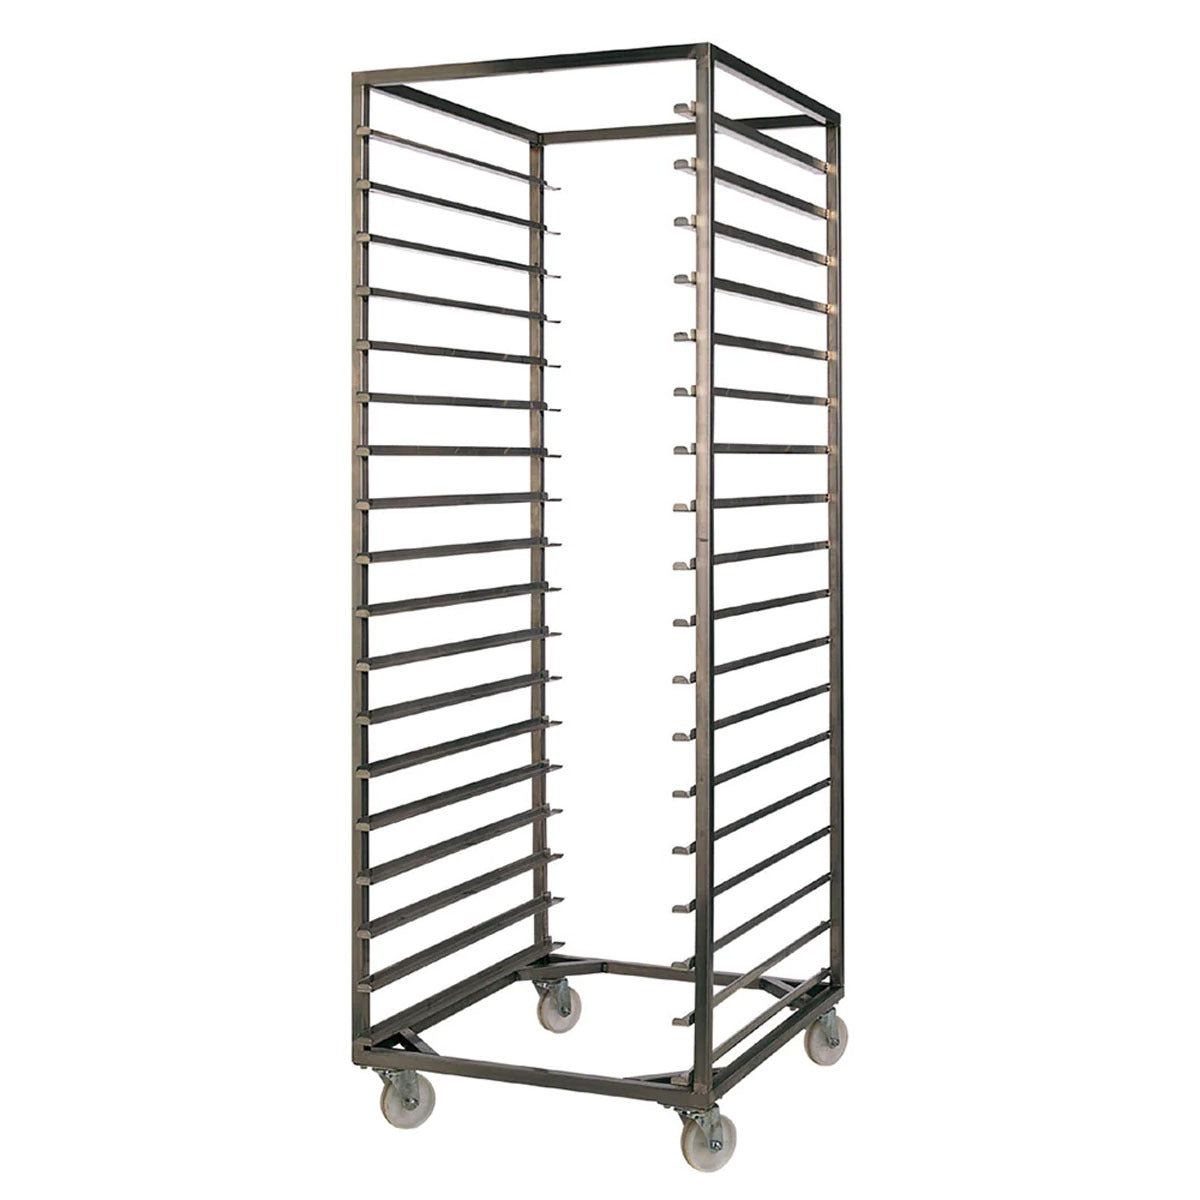 Stainless steel tray rack trolley